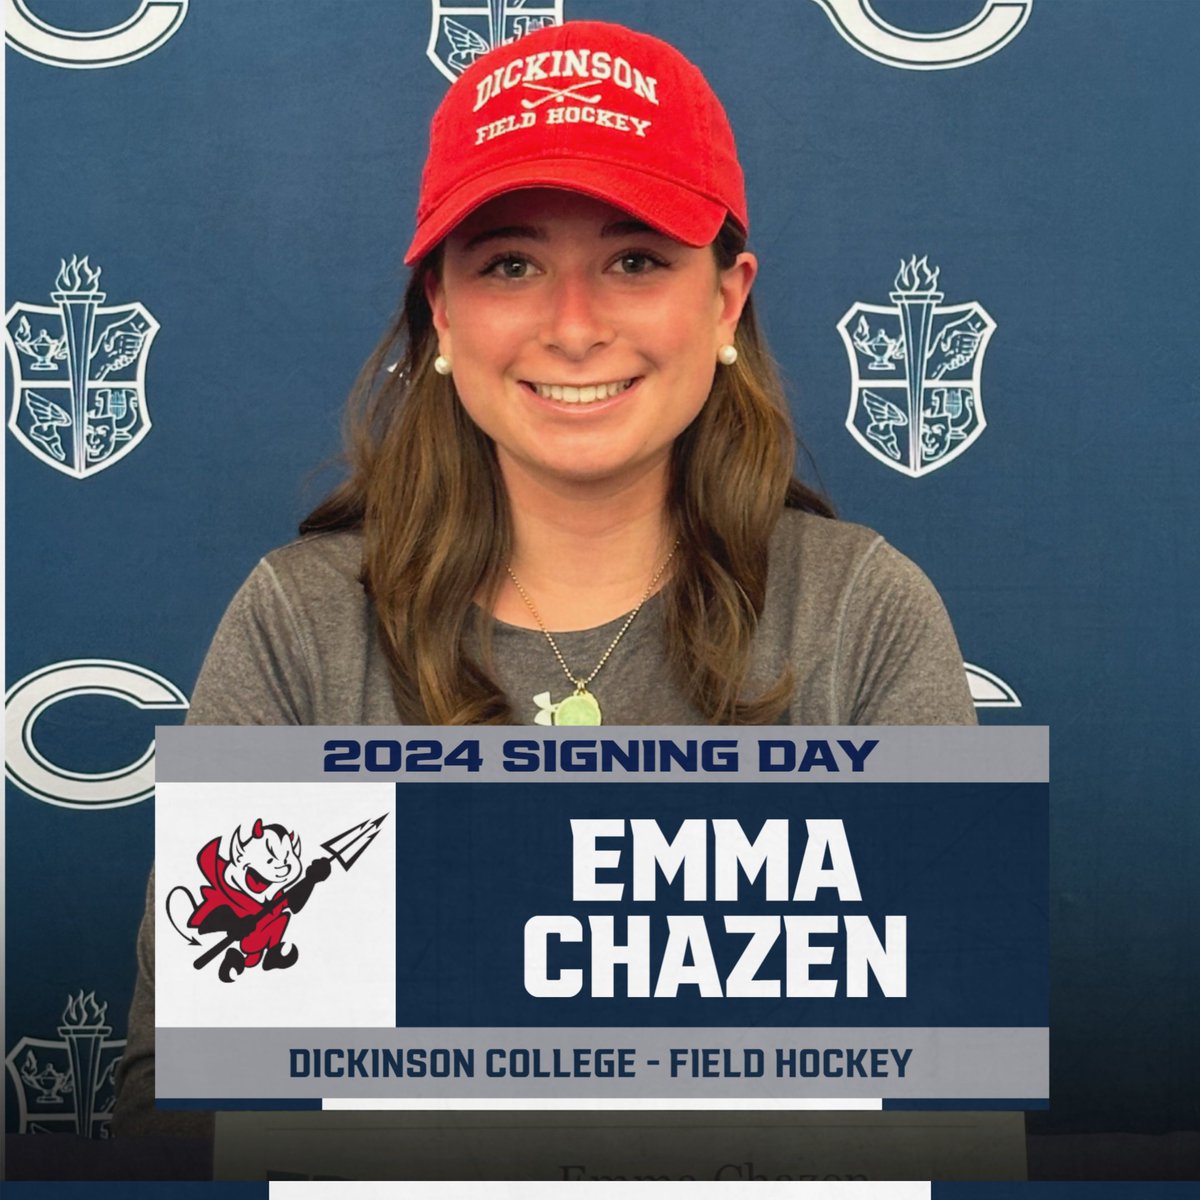 Congratulations to Emma Chazen who has committed to play field hockey for Dickinson College next year! Best of Luck as you continue your athletic career! @ChathamCougars @Athletics_CHS @ChathamsTAP @dailyrecordspts @ChathamCourier1 @ChathamHS @DsonRedDevils